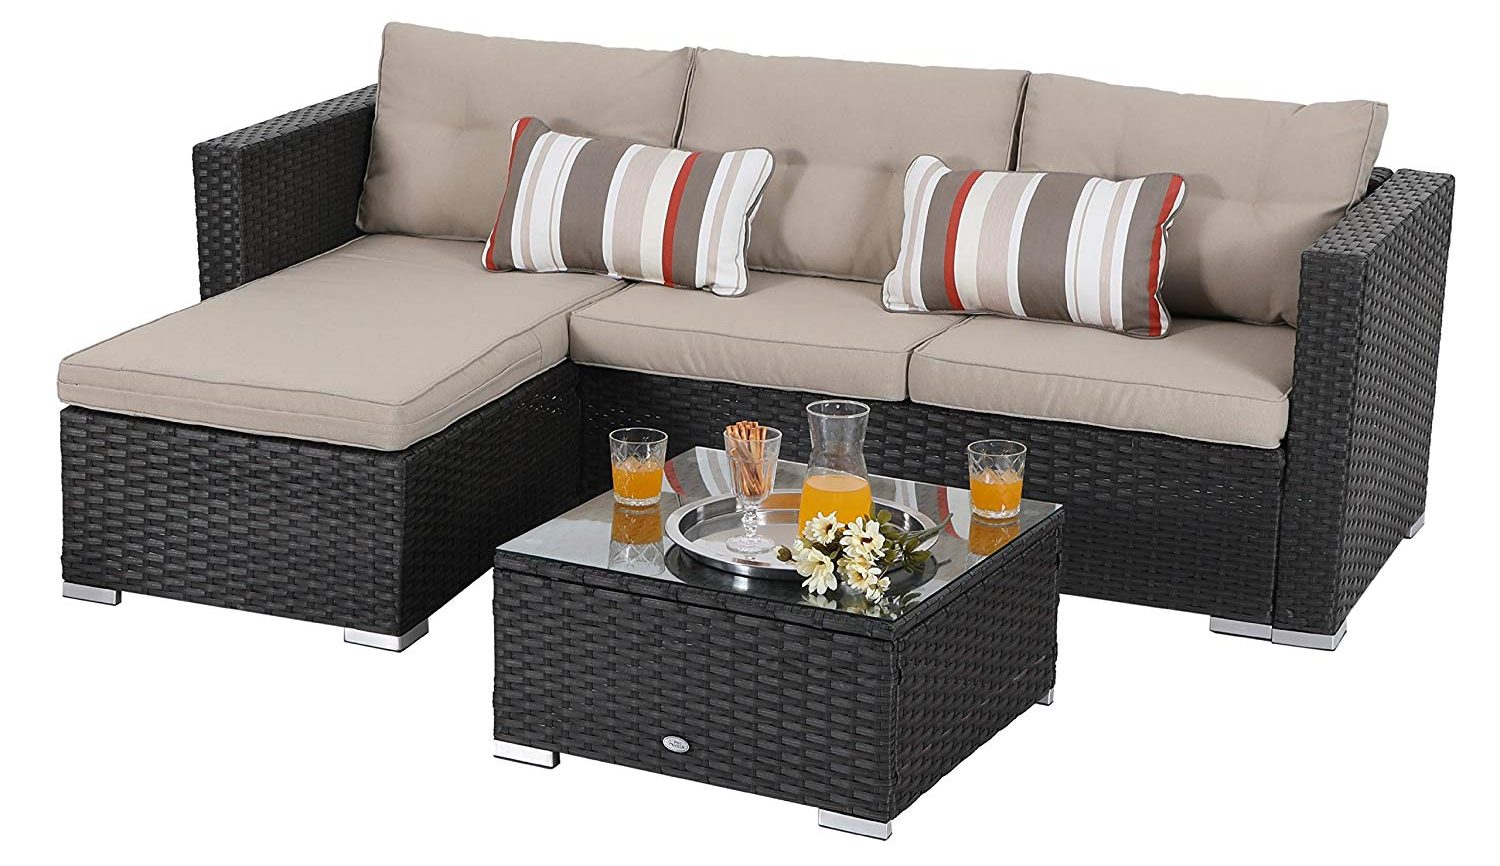 Outdoor Sectional Sofa